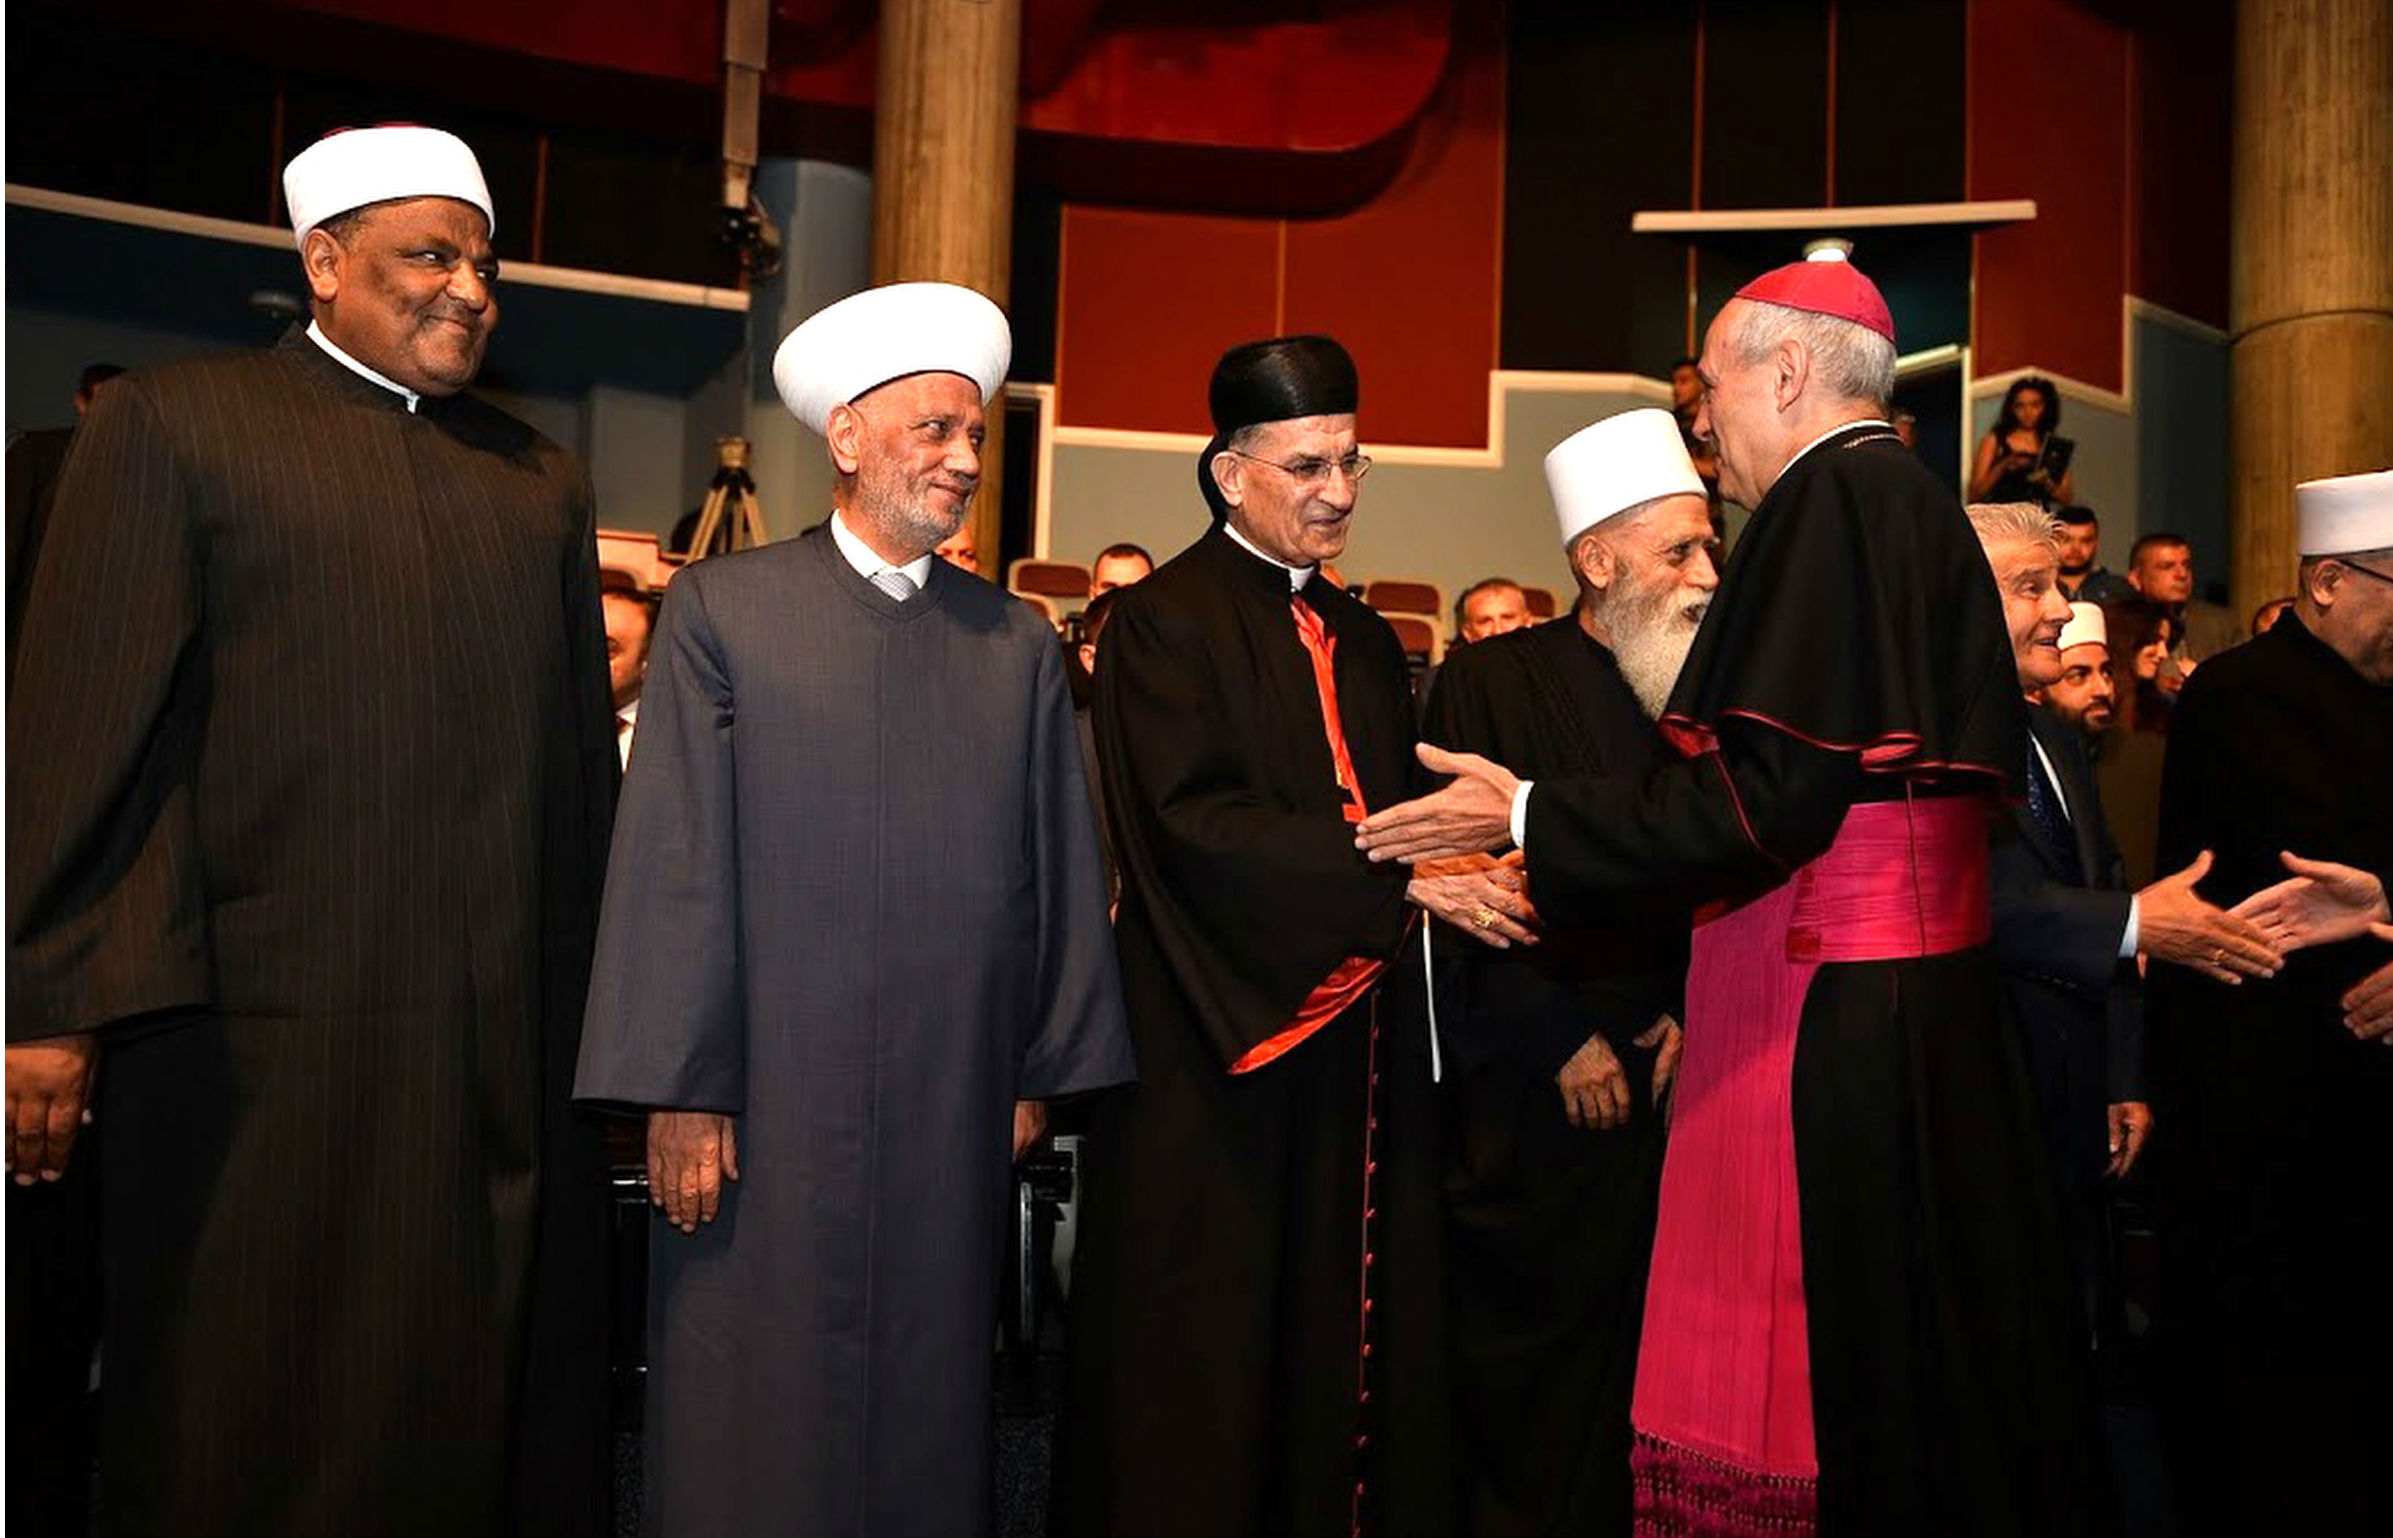 Coexistence and 'deepening of democracy in Lebanon' sends message of hope, say Christian and Muslim leaders  